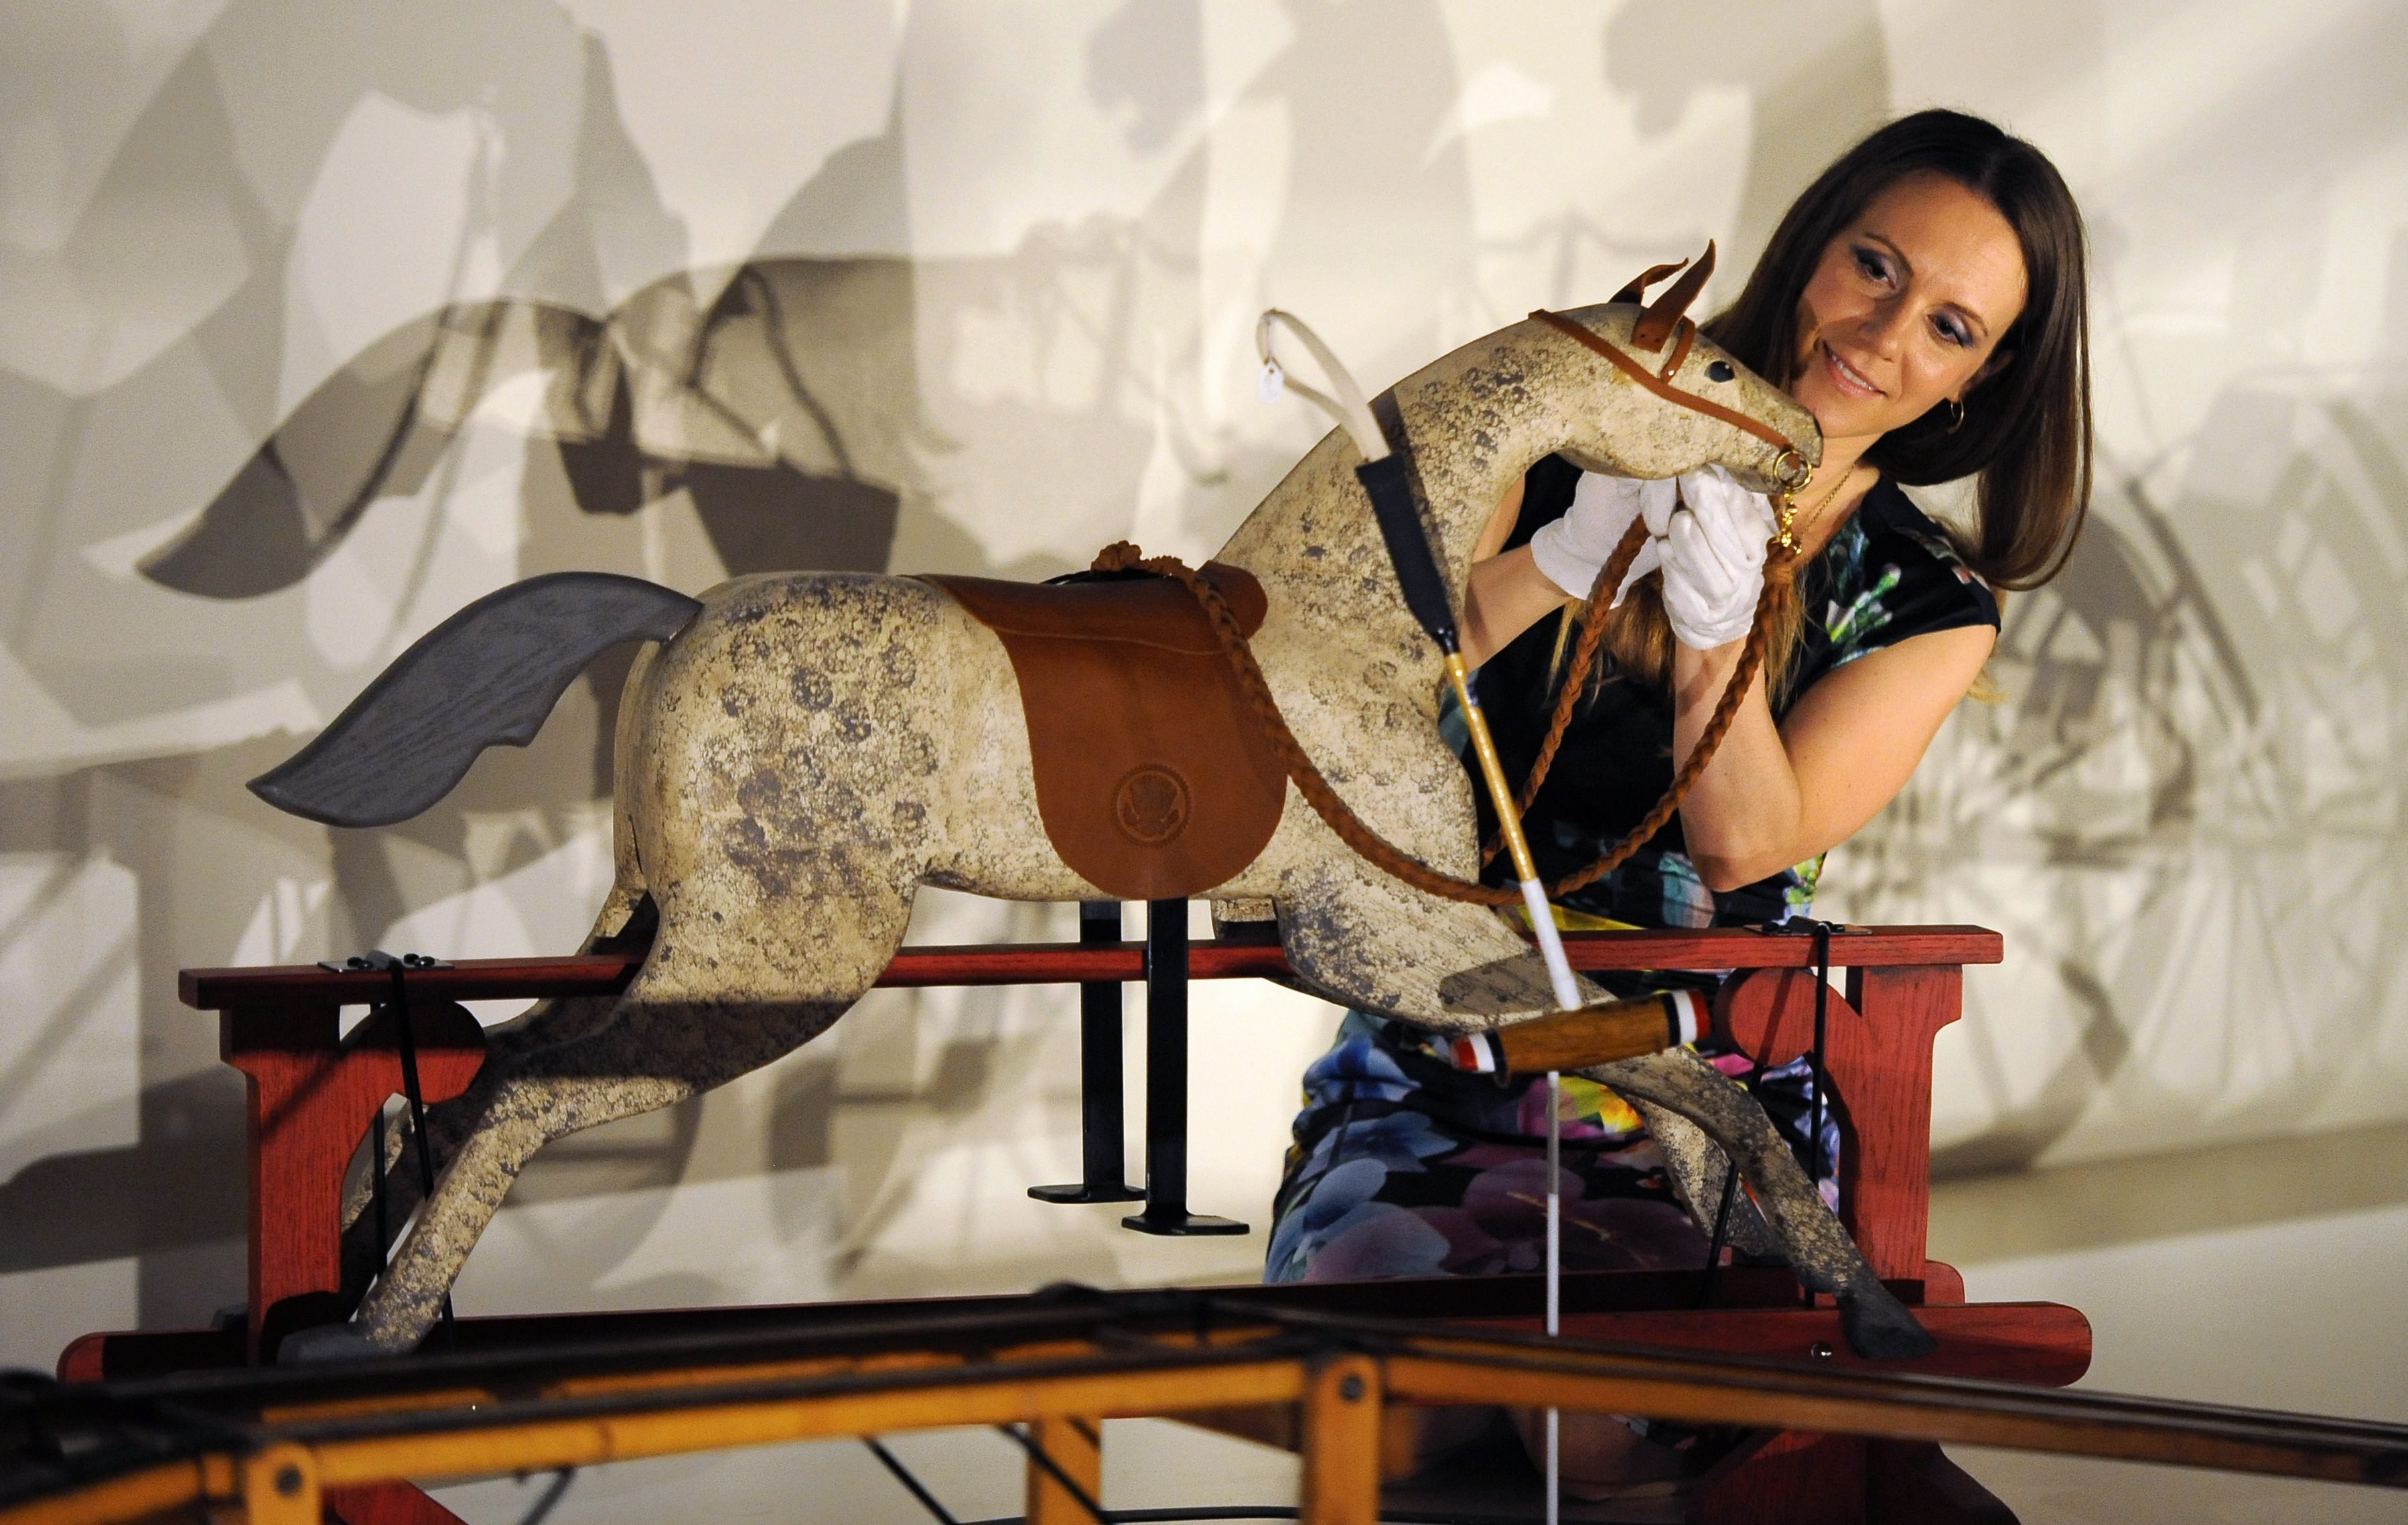 Curator Anna Reynolds adds the finishing touches to a rocking horse presented to Prince George of Cambridge by U..S President Barak Obama and his wife Michelle Obama at the 'Royal Childhood' exhibition at Buckingham Palace in London on July 24, 2014.